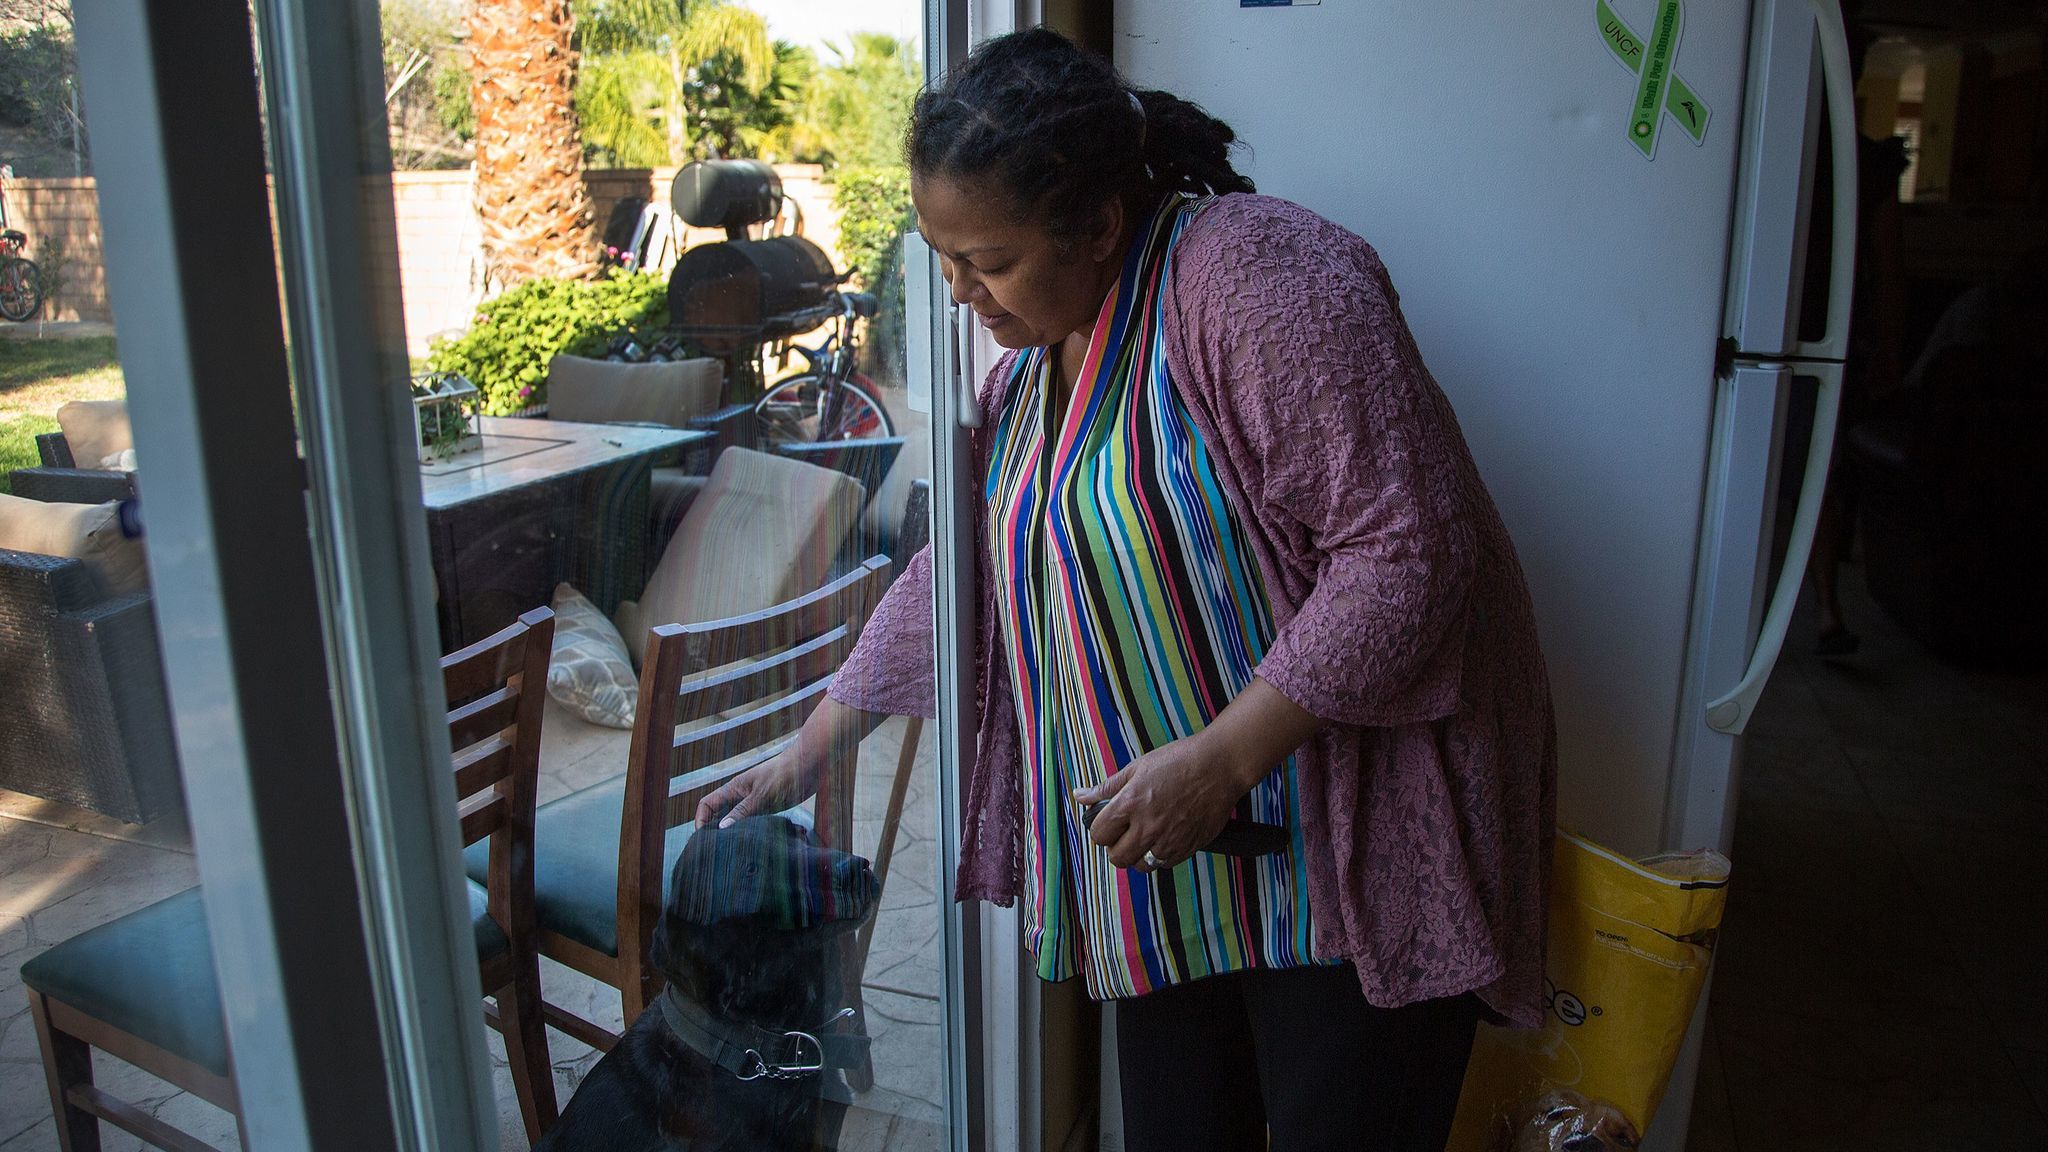 Vonya Quarles, executive director of Starting Over Inc., pets Charlie, a Labrador, at a men's transitional home she runs in Corona. Programs like hers aim to help former inmates reenter society.